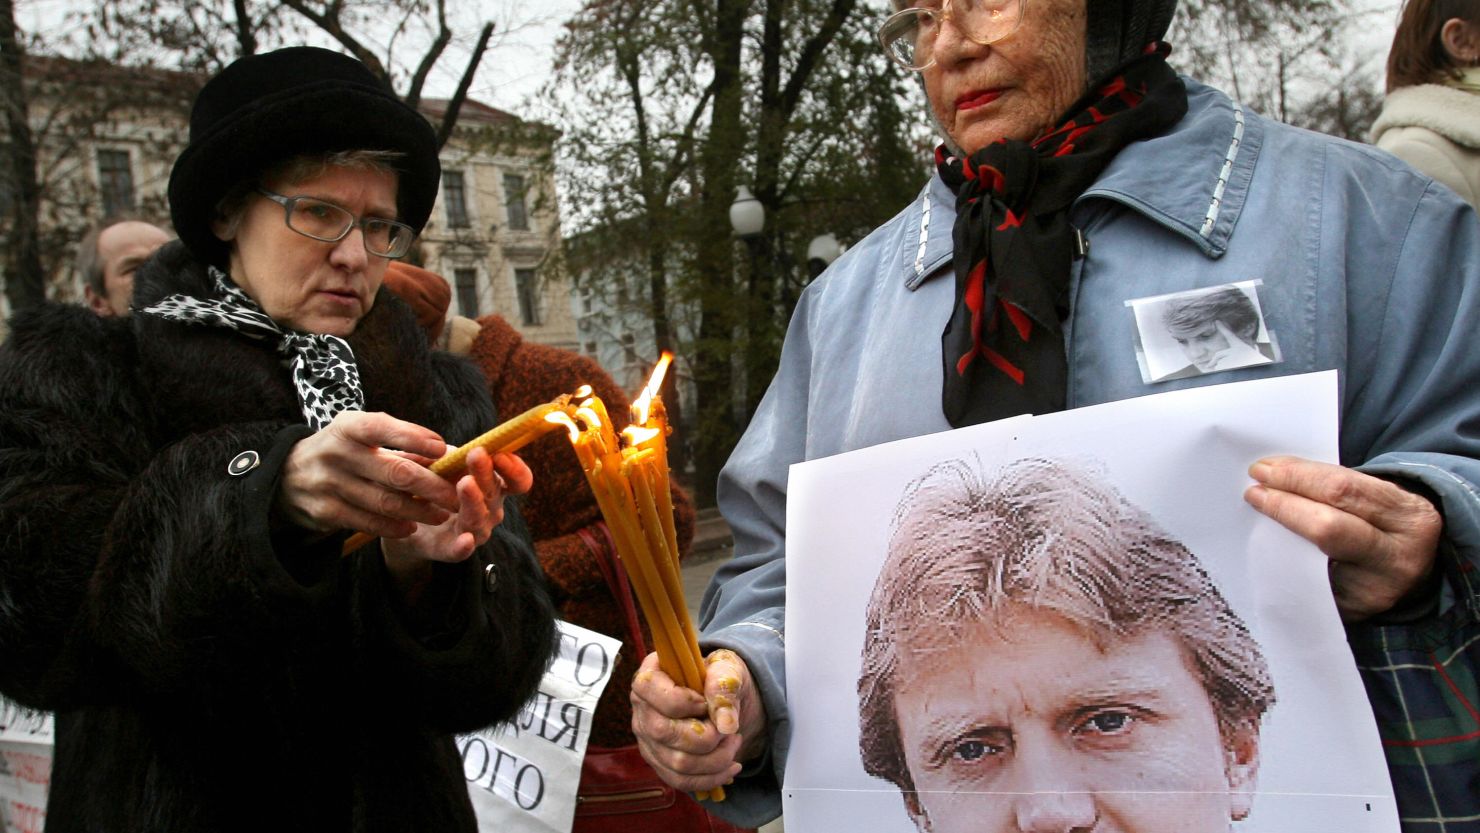 (File photo) Women holding a poster of Alexander Litvinenko light candles in his honor in Moscow on November 22, 2008. 